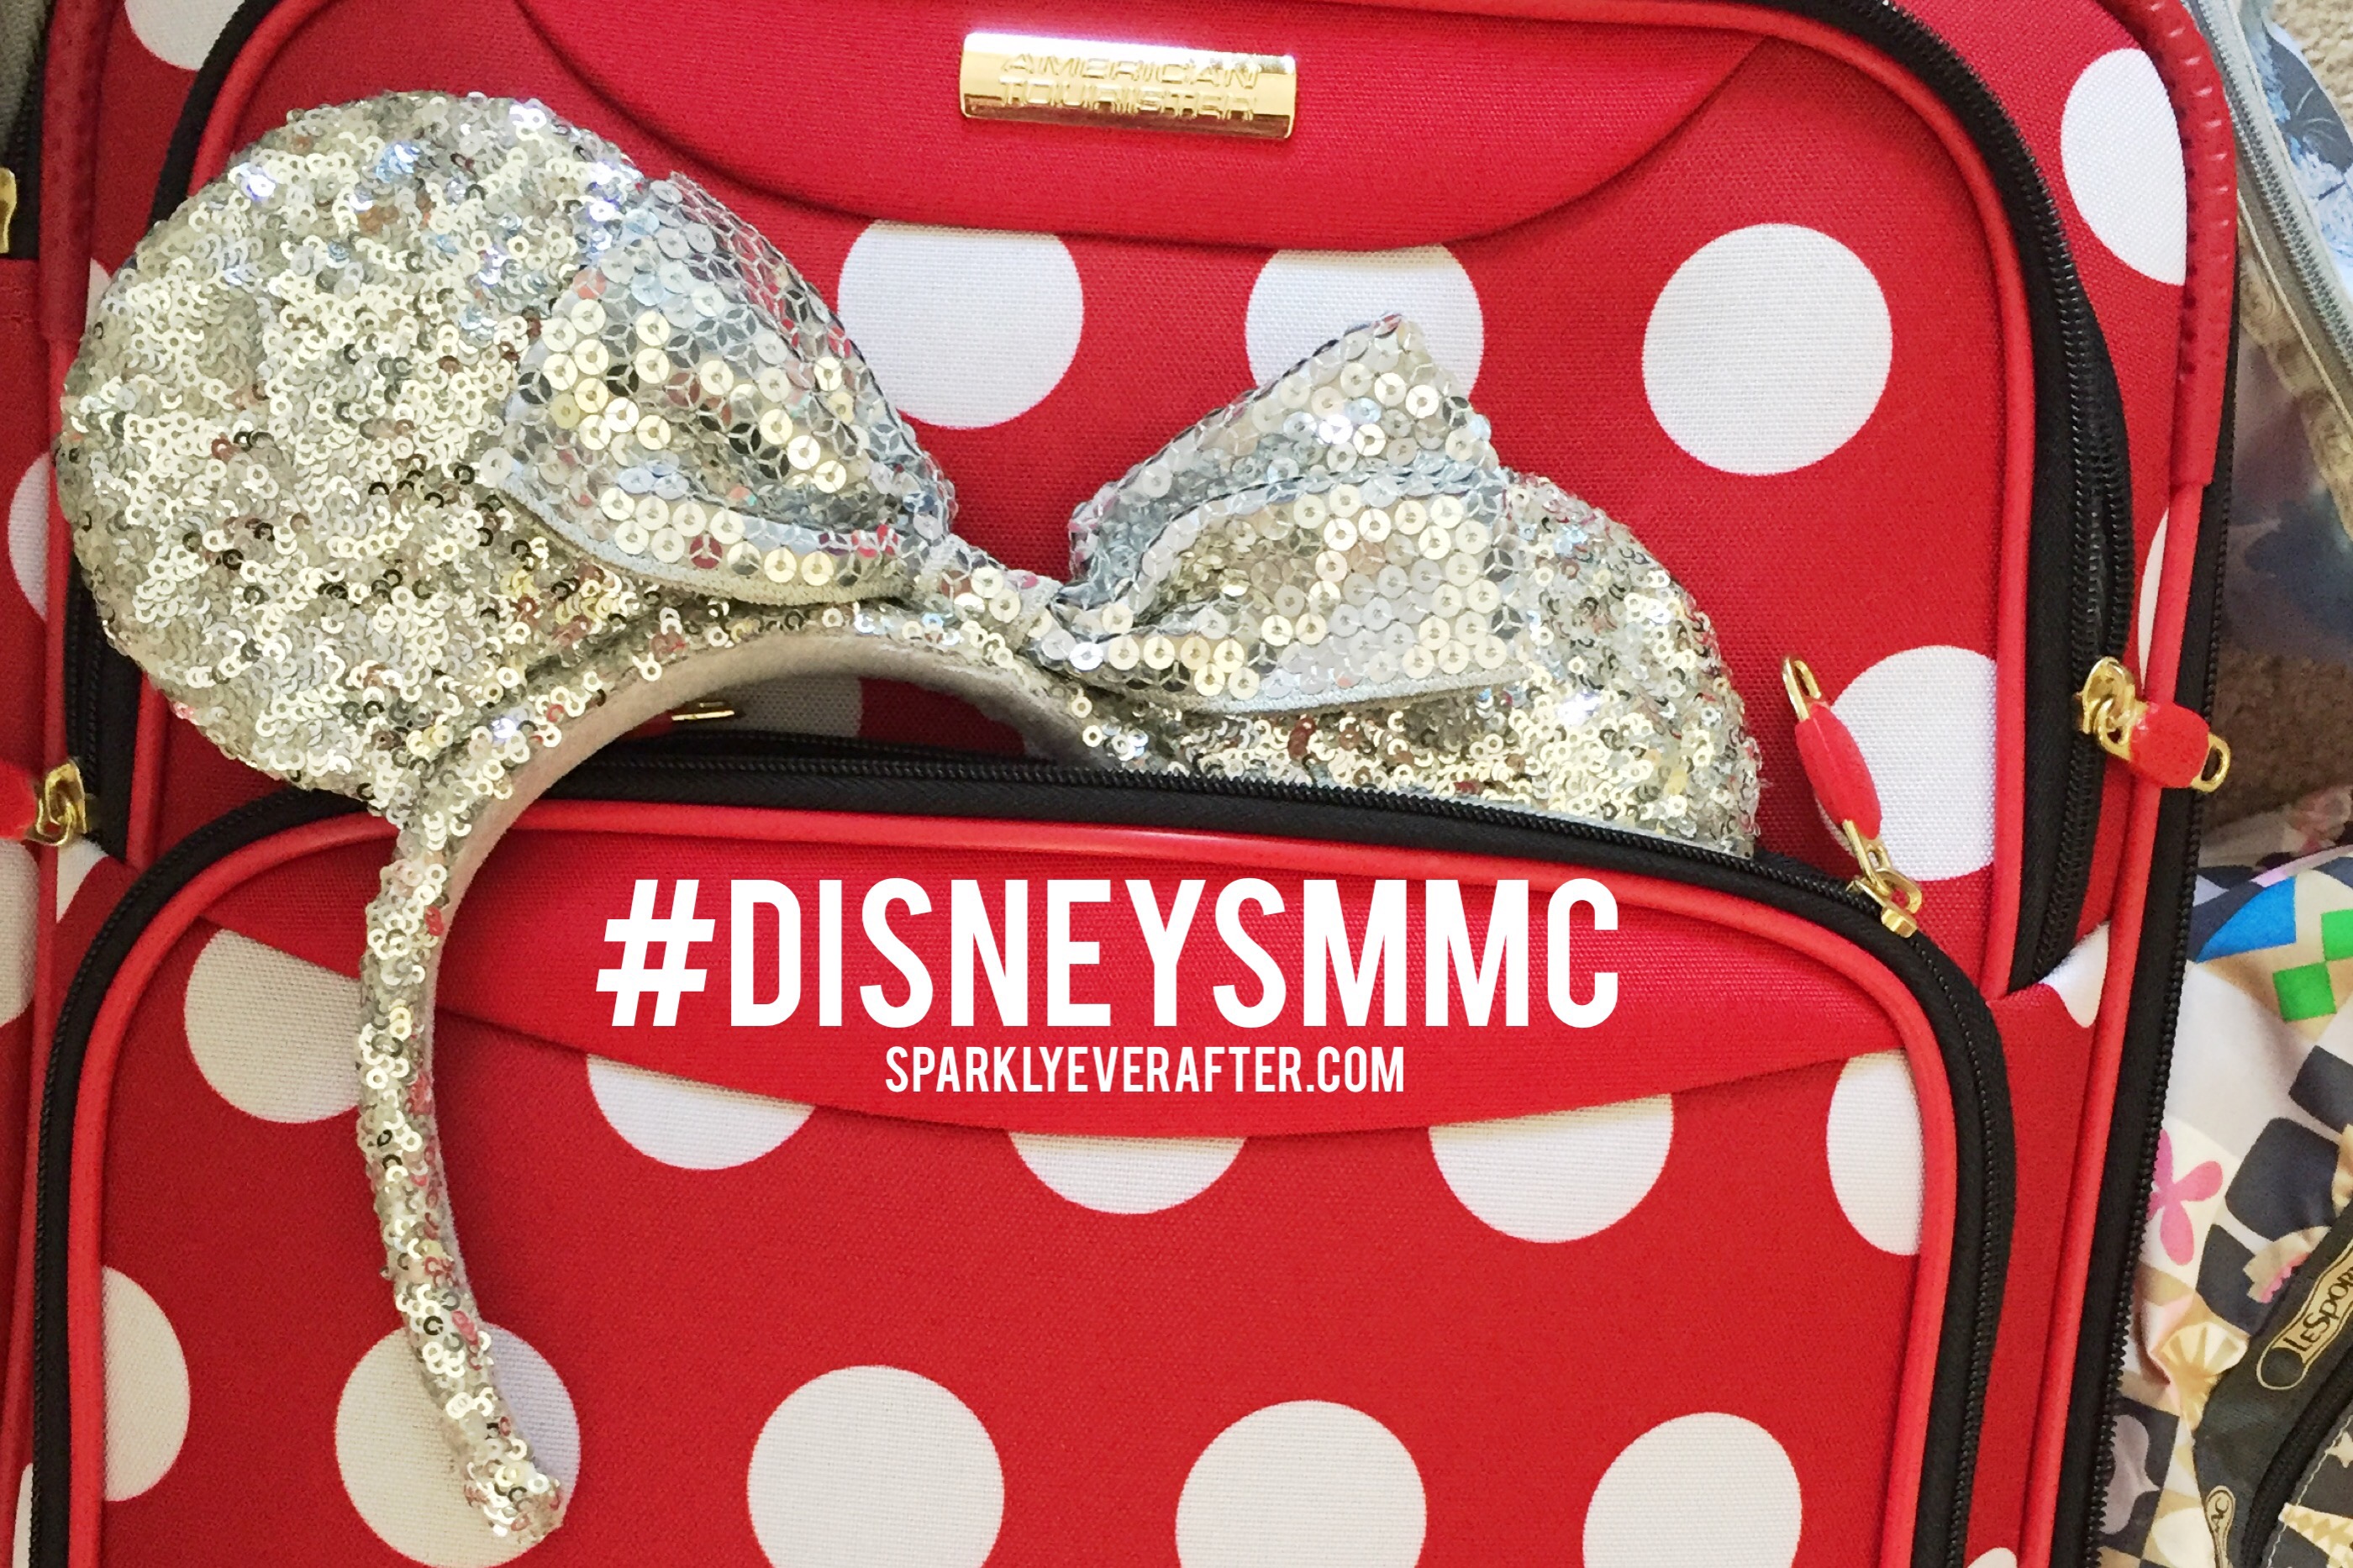 American Tourister Minnie Mouse Luggage SparklyEverAfter.com